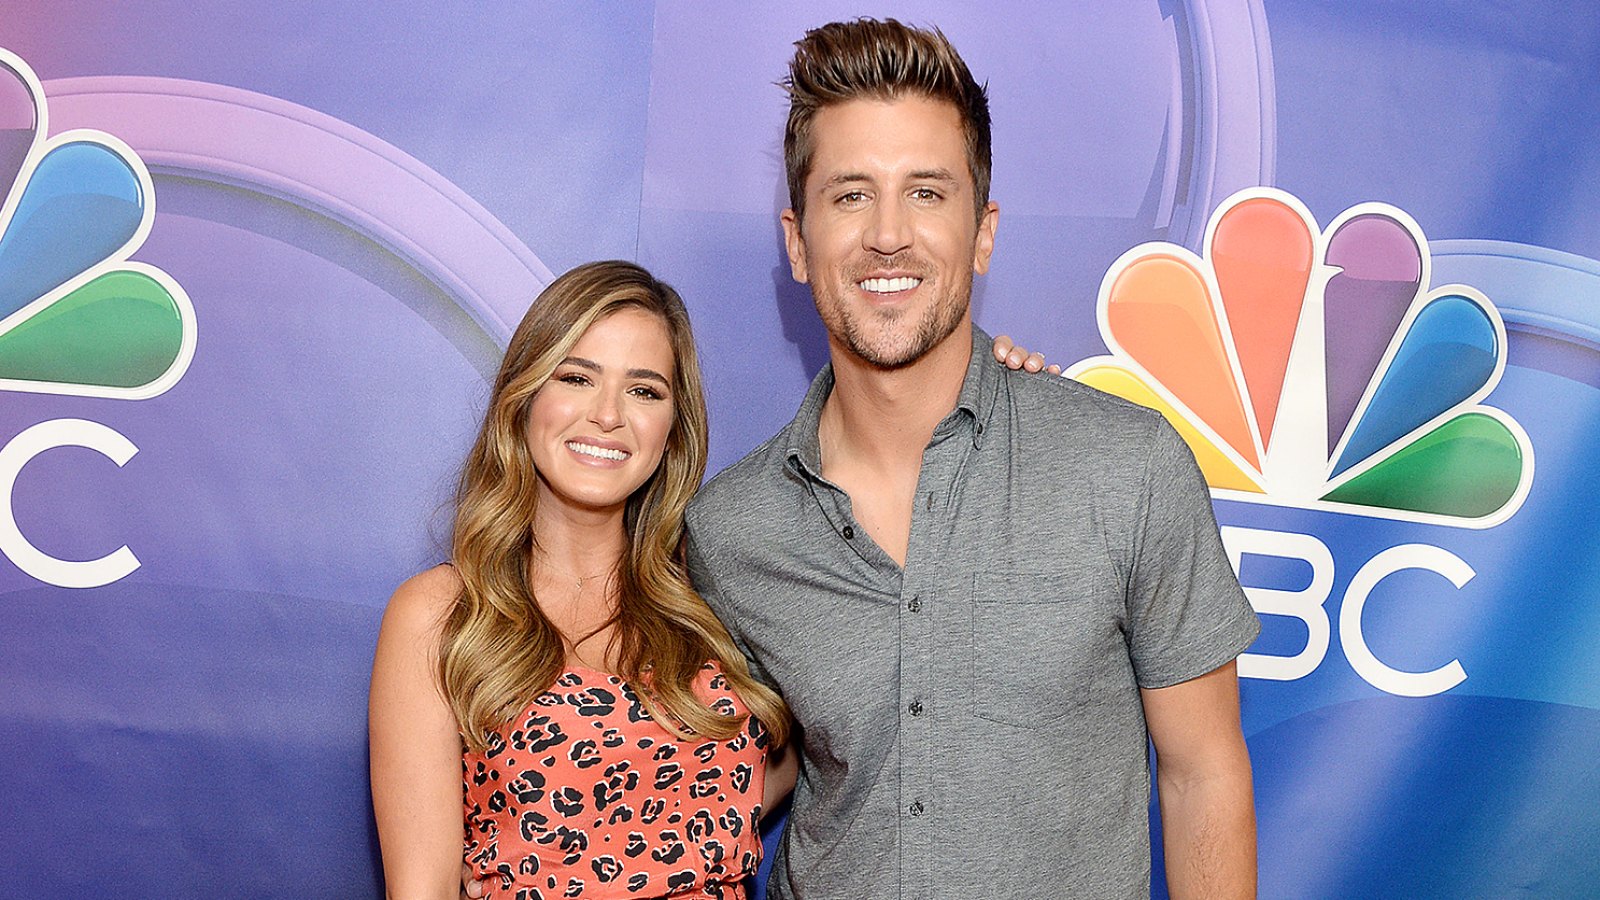 JoJo Fletcher and Jordan Rodgers Reveal When They Want to Have a Baby